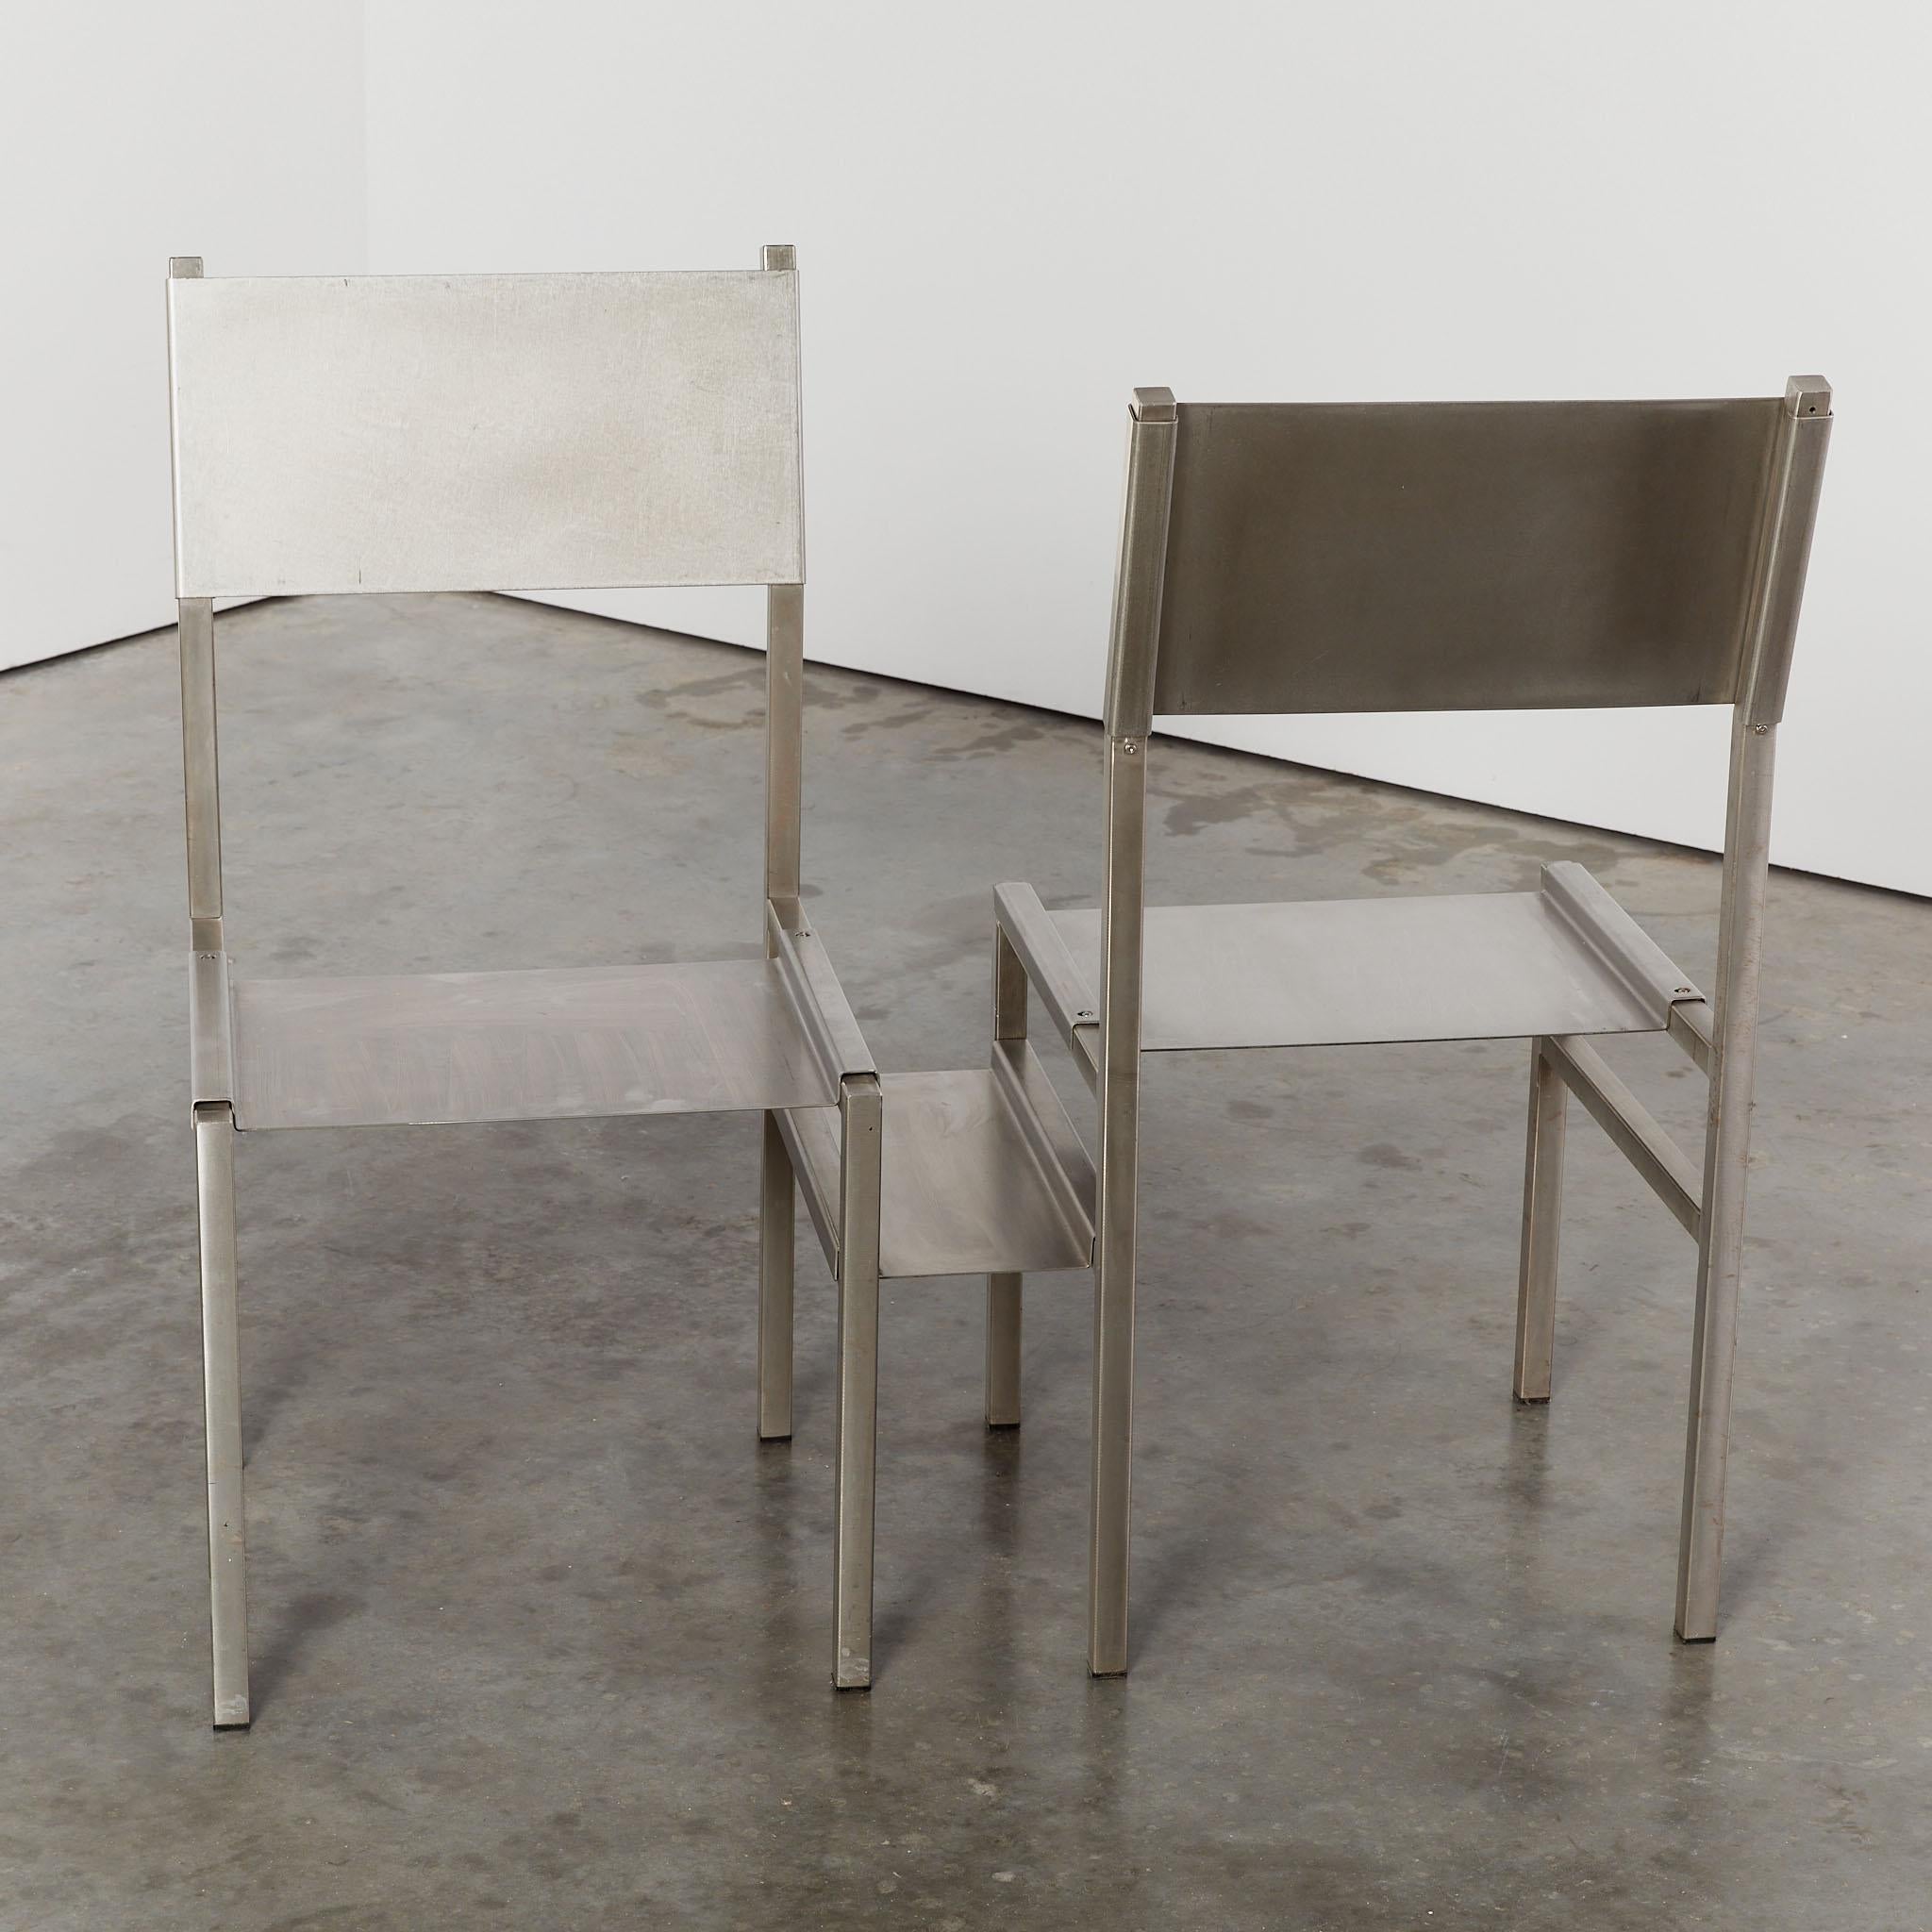 Stainless steel post modern Plugin loveseat by Christoph Siebrasse, edition of 6 For Sale 5